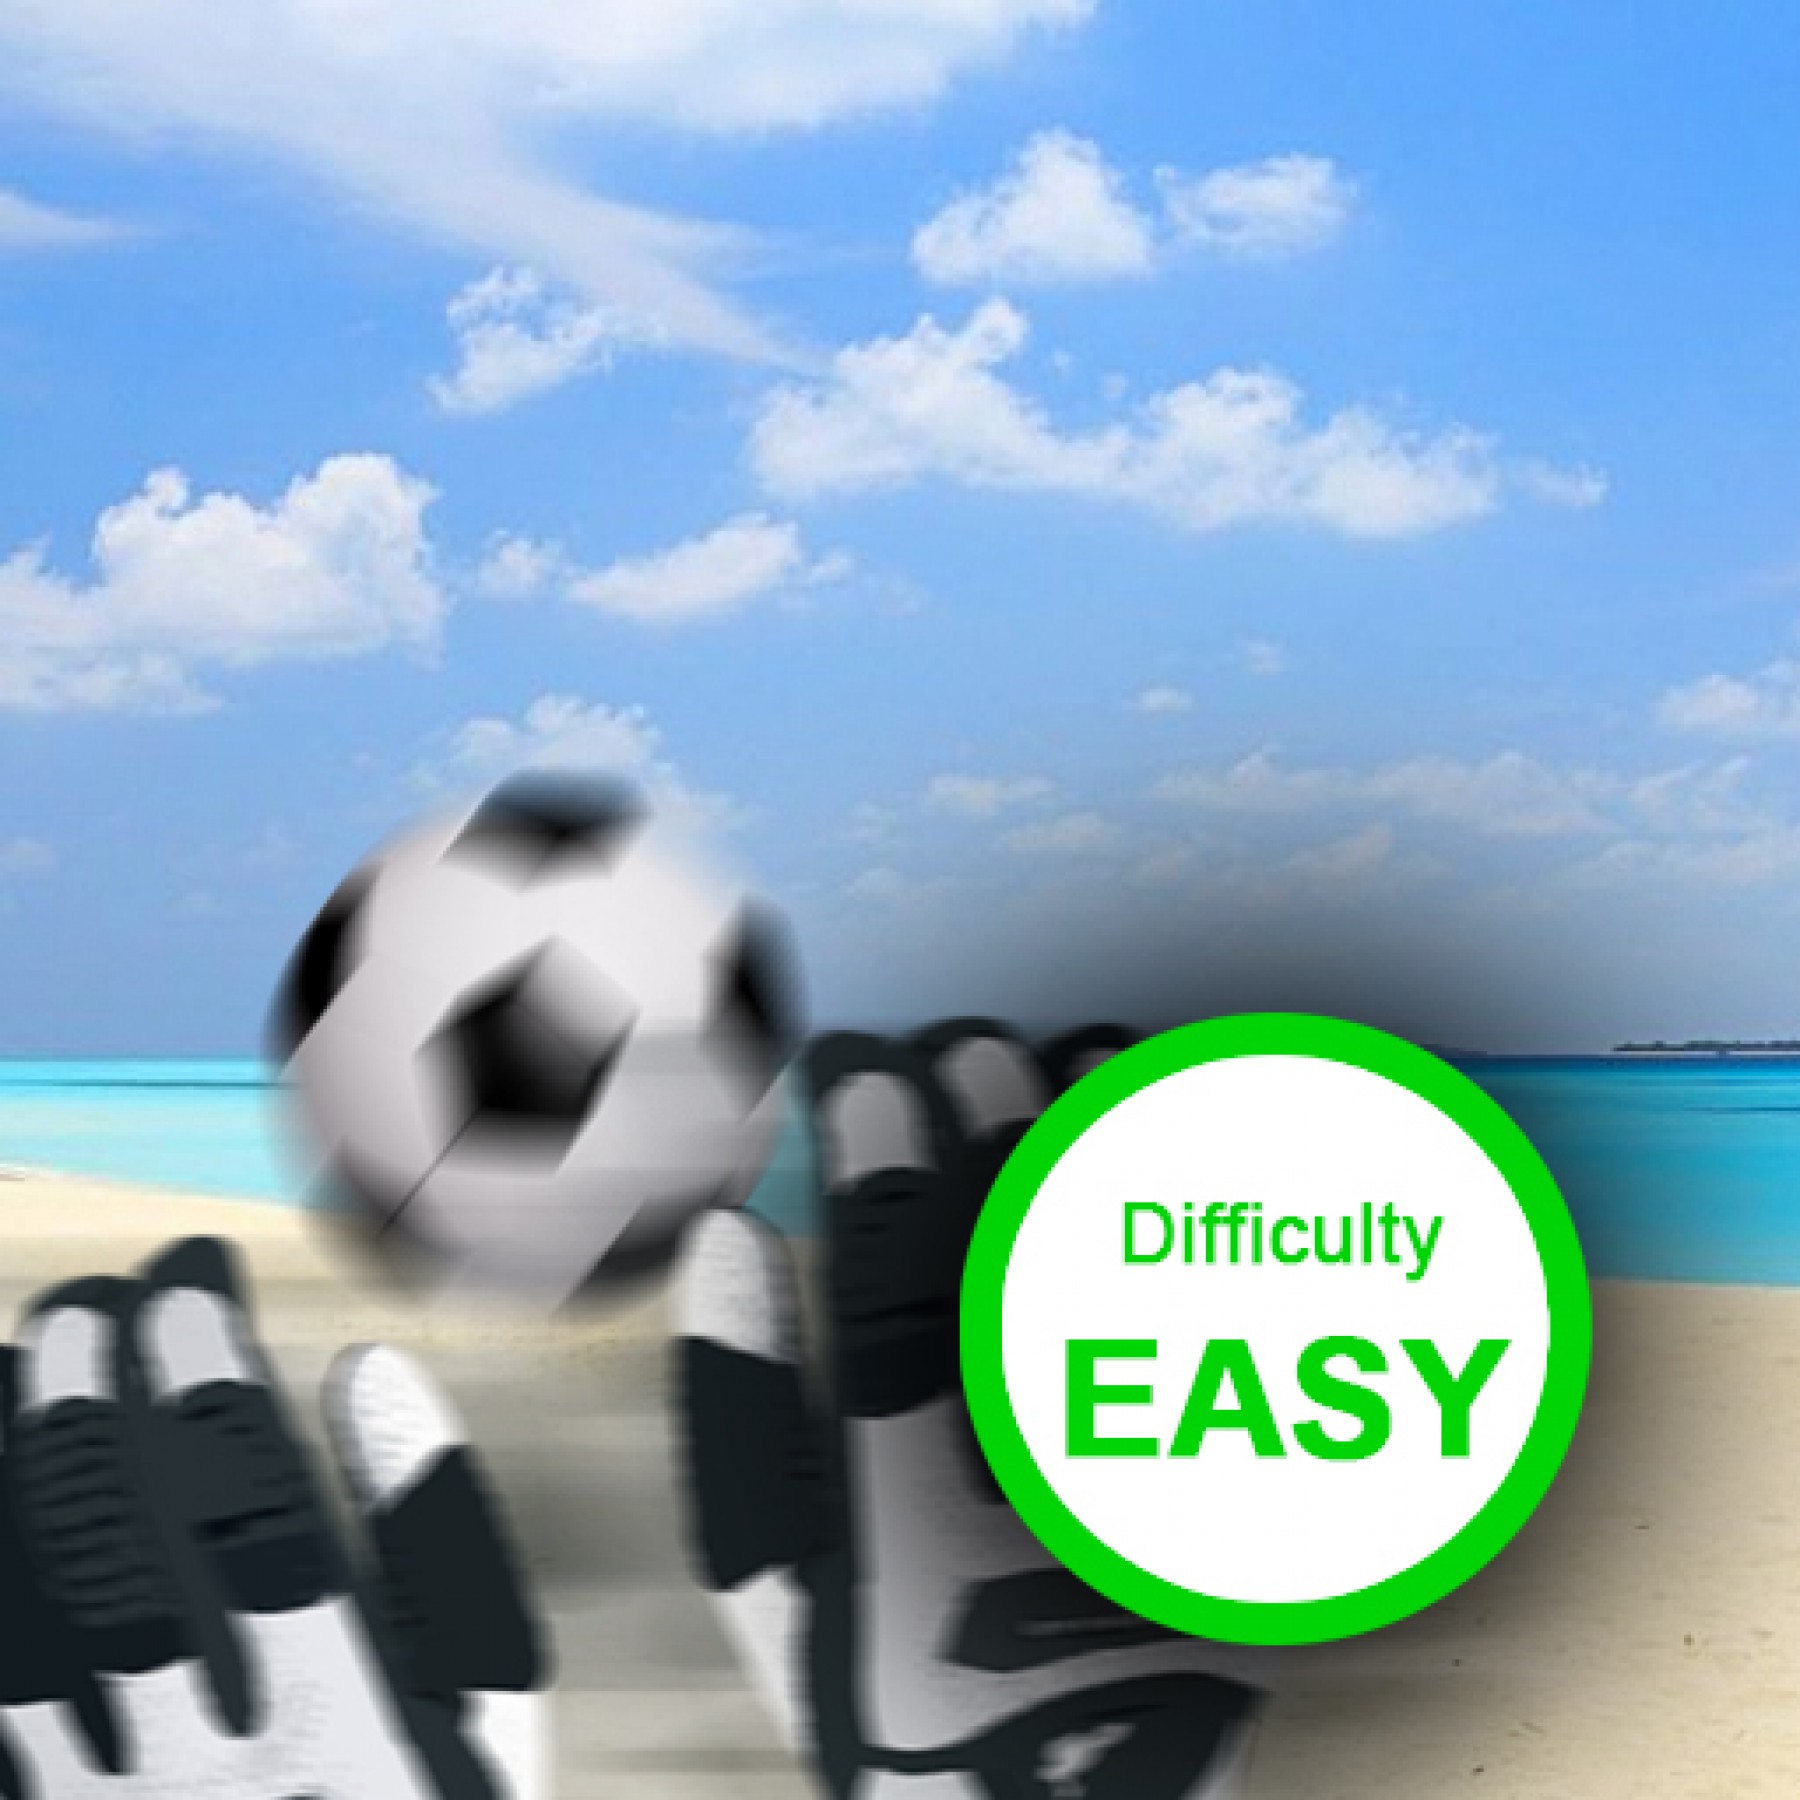 easy-beach-soccer-games-travel-active-sports-adults-main-location1